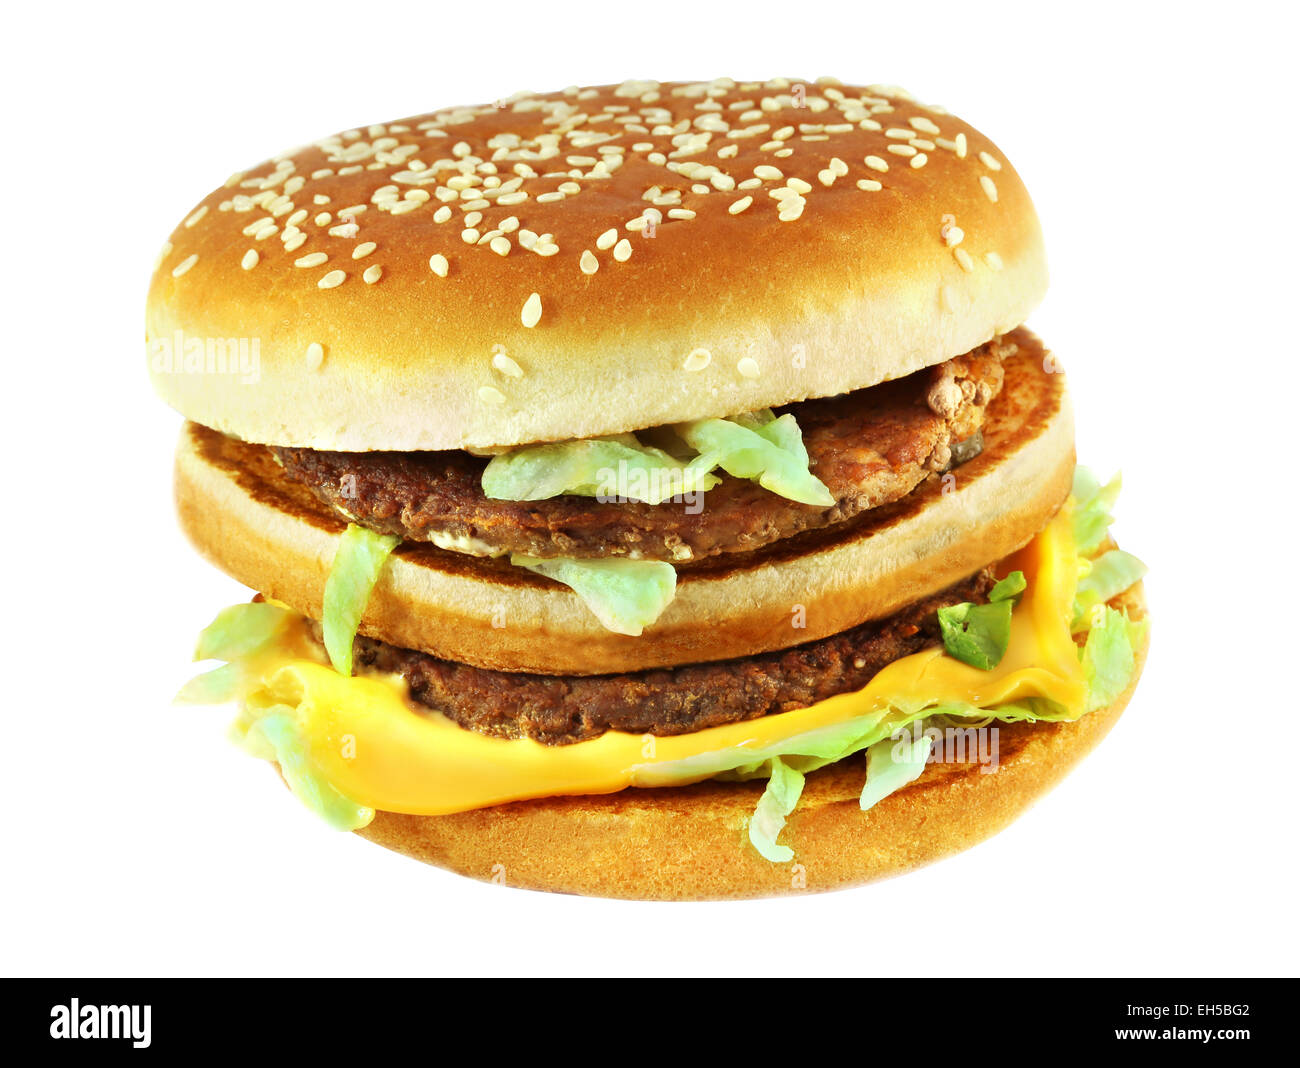 large multilayer tasty burger on a white background Stock Photo